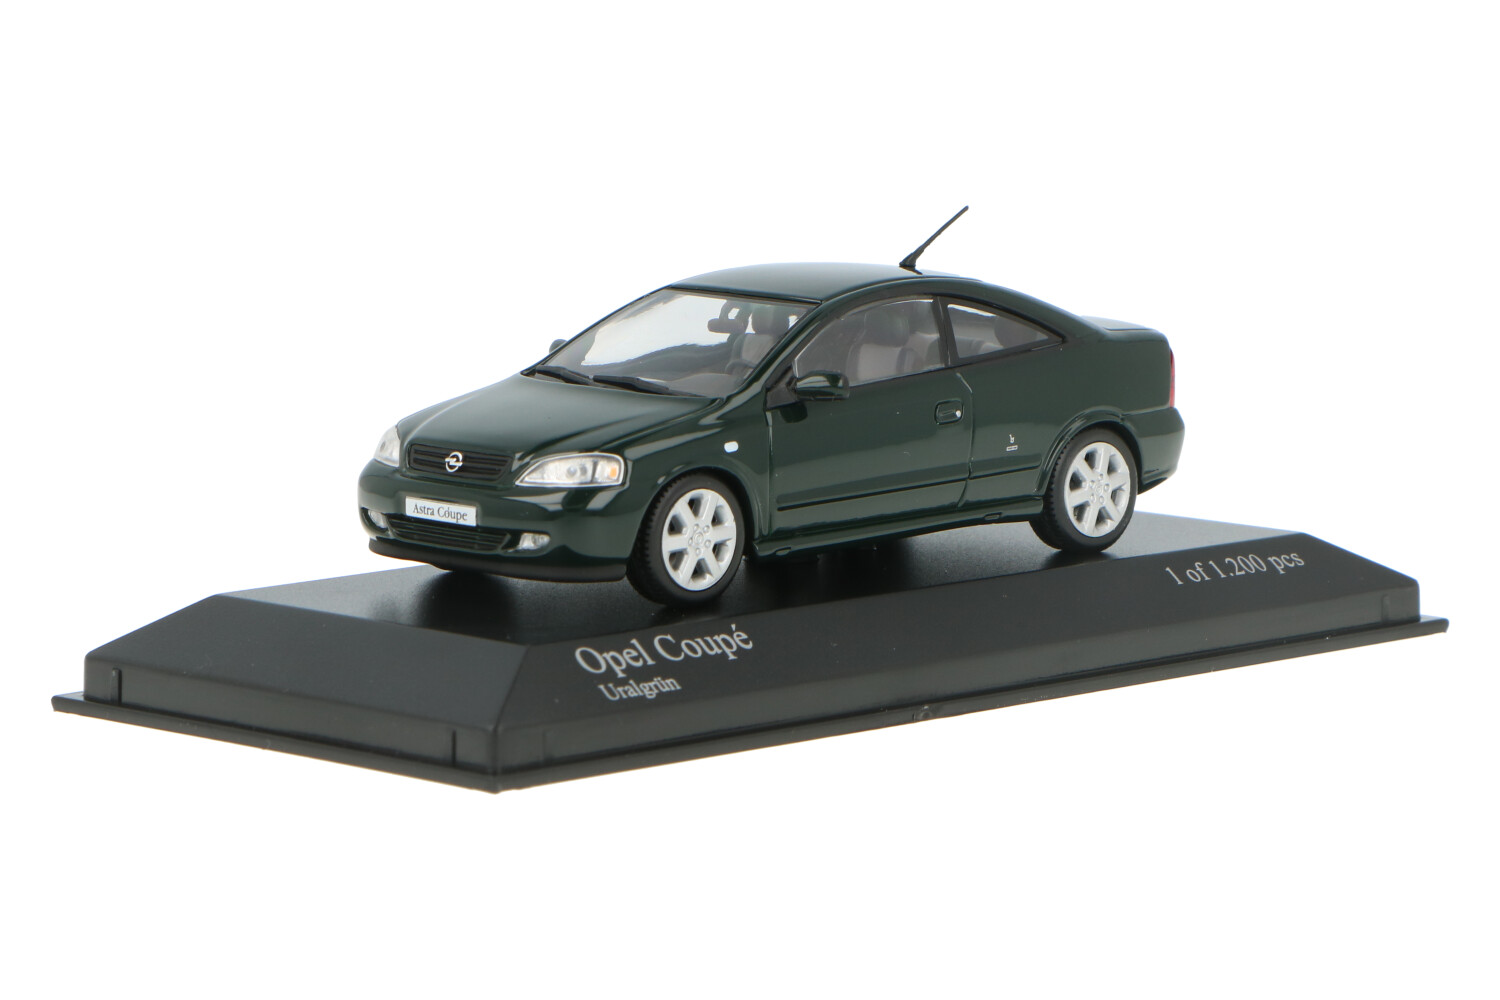 Opel-Coupe-2000-430049122_13154012138038530Opel-Coupe-2000-430049122_Houseofmodelcars_.jpg